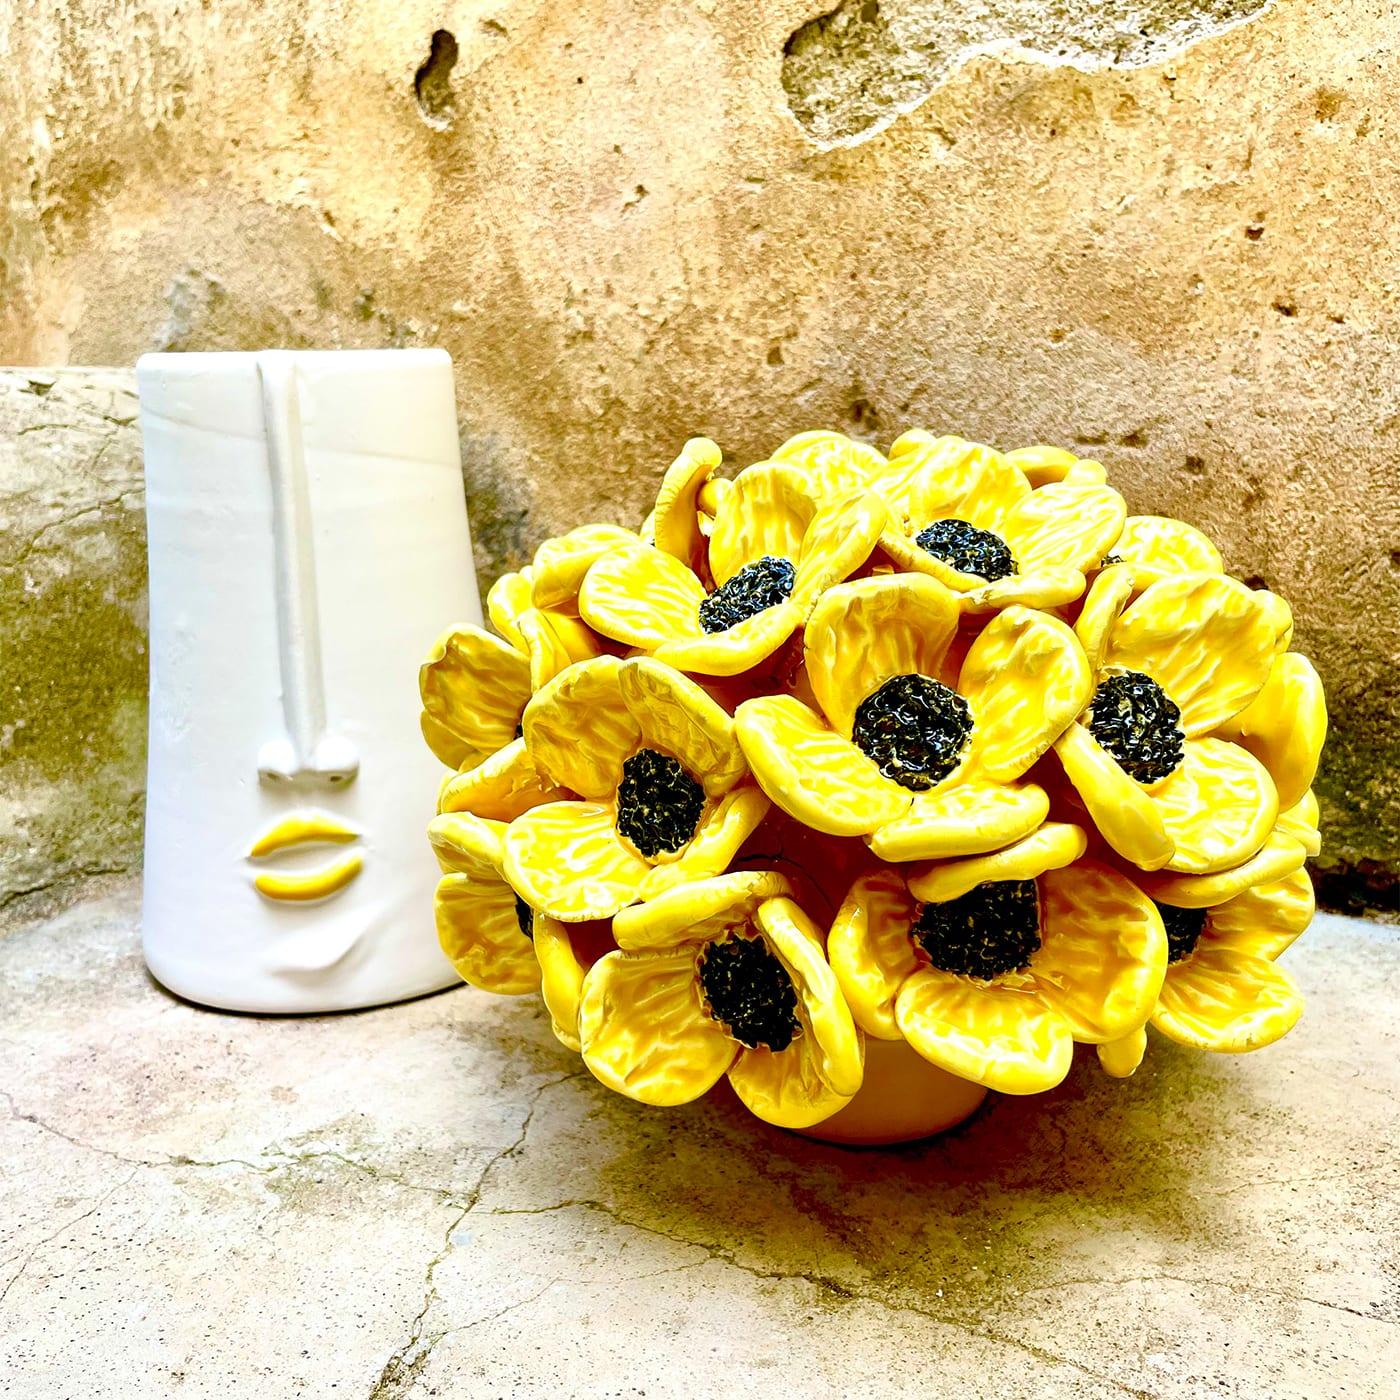 An authentic work of art sporting playful anthropomorphic traits, this ceramic design is a romantic synthesis of decorative and storage potential. Equipped with an inner unit to easily collect items, it boasts a bouquet of blossoming yellow daisies